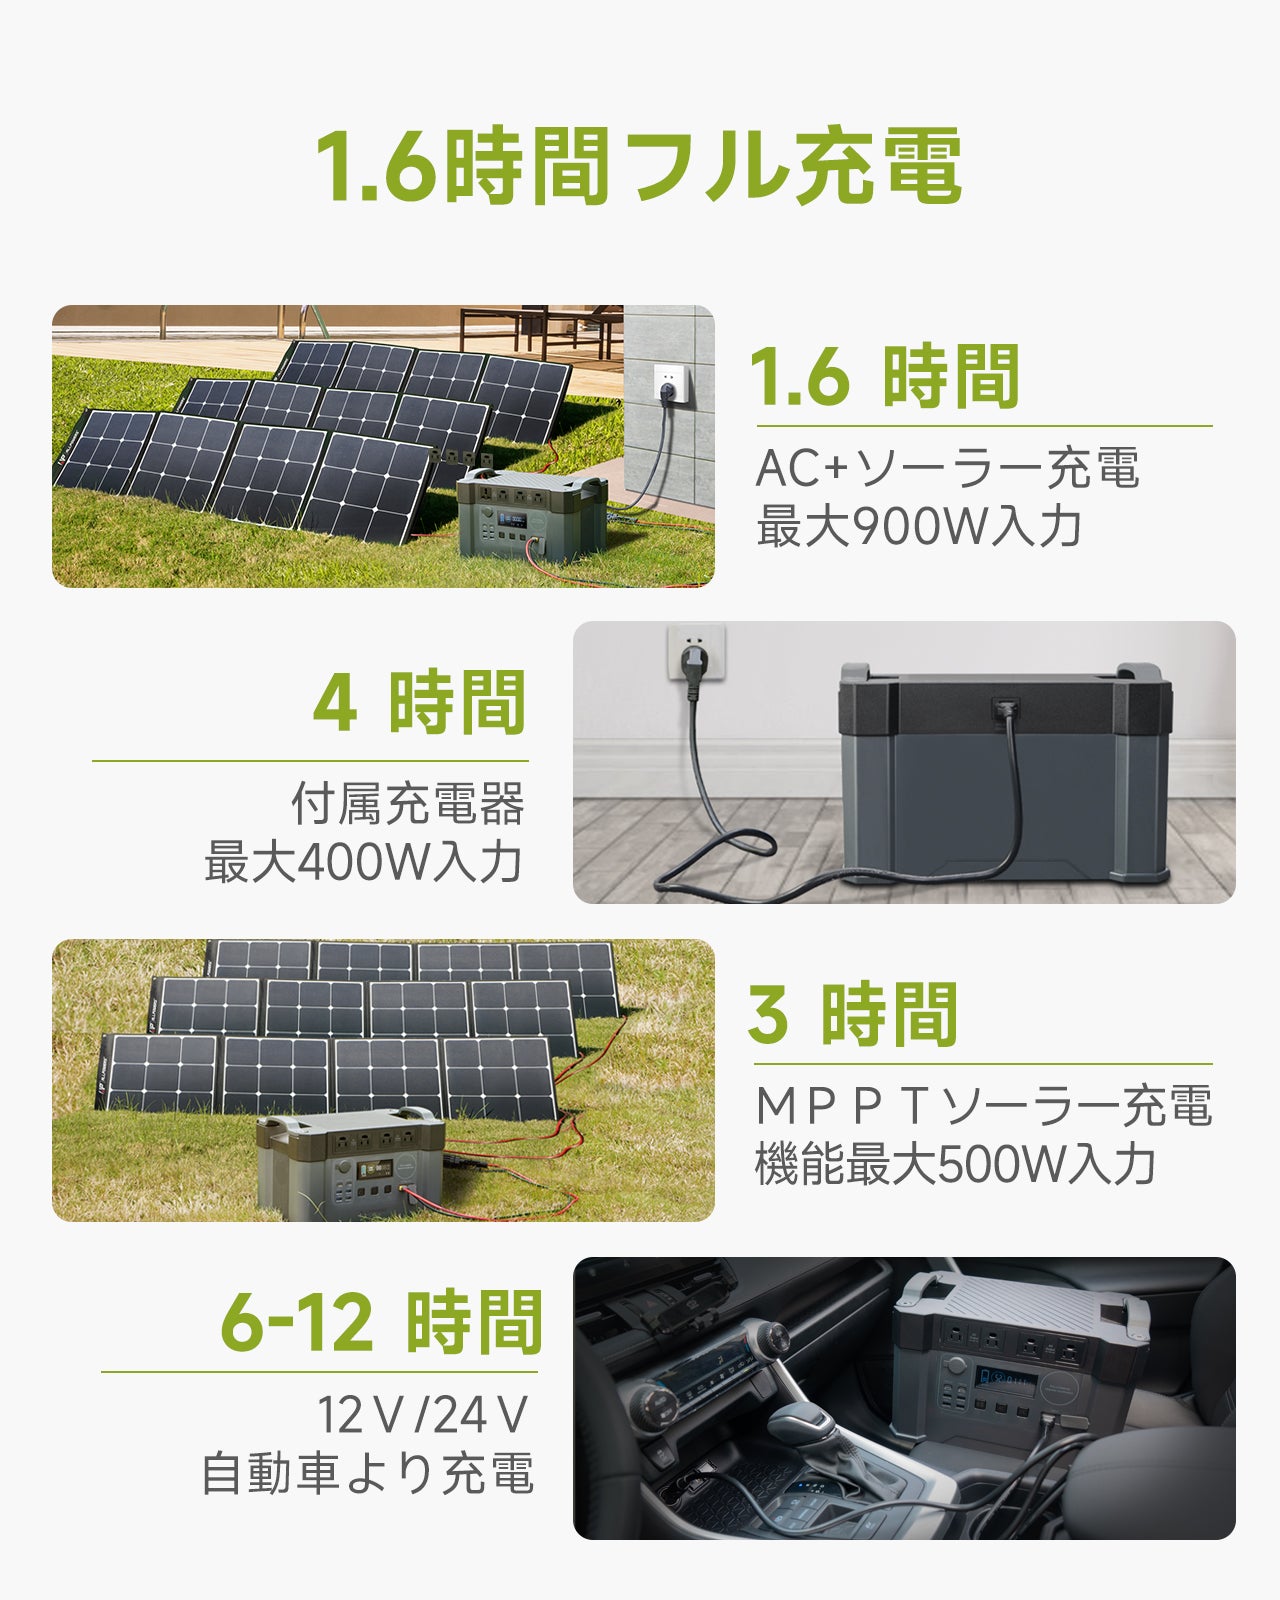 ALLPOWERS S2000 ポータブル電源(1500Wh/2000W) – ALLPOWERS公式サイト